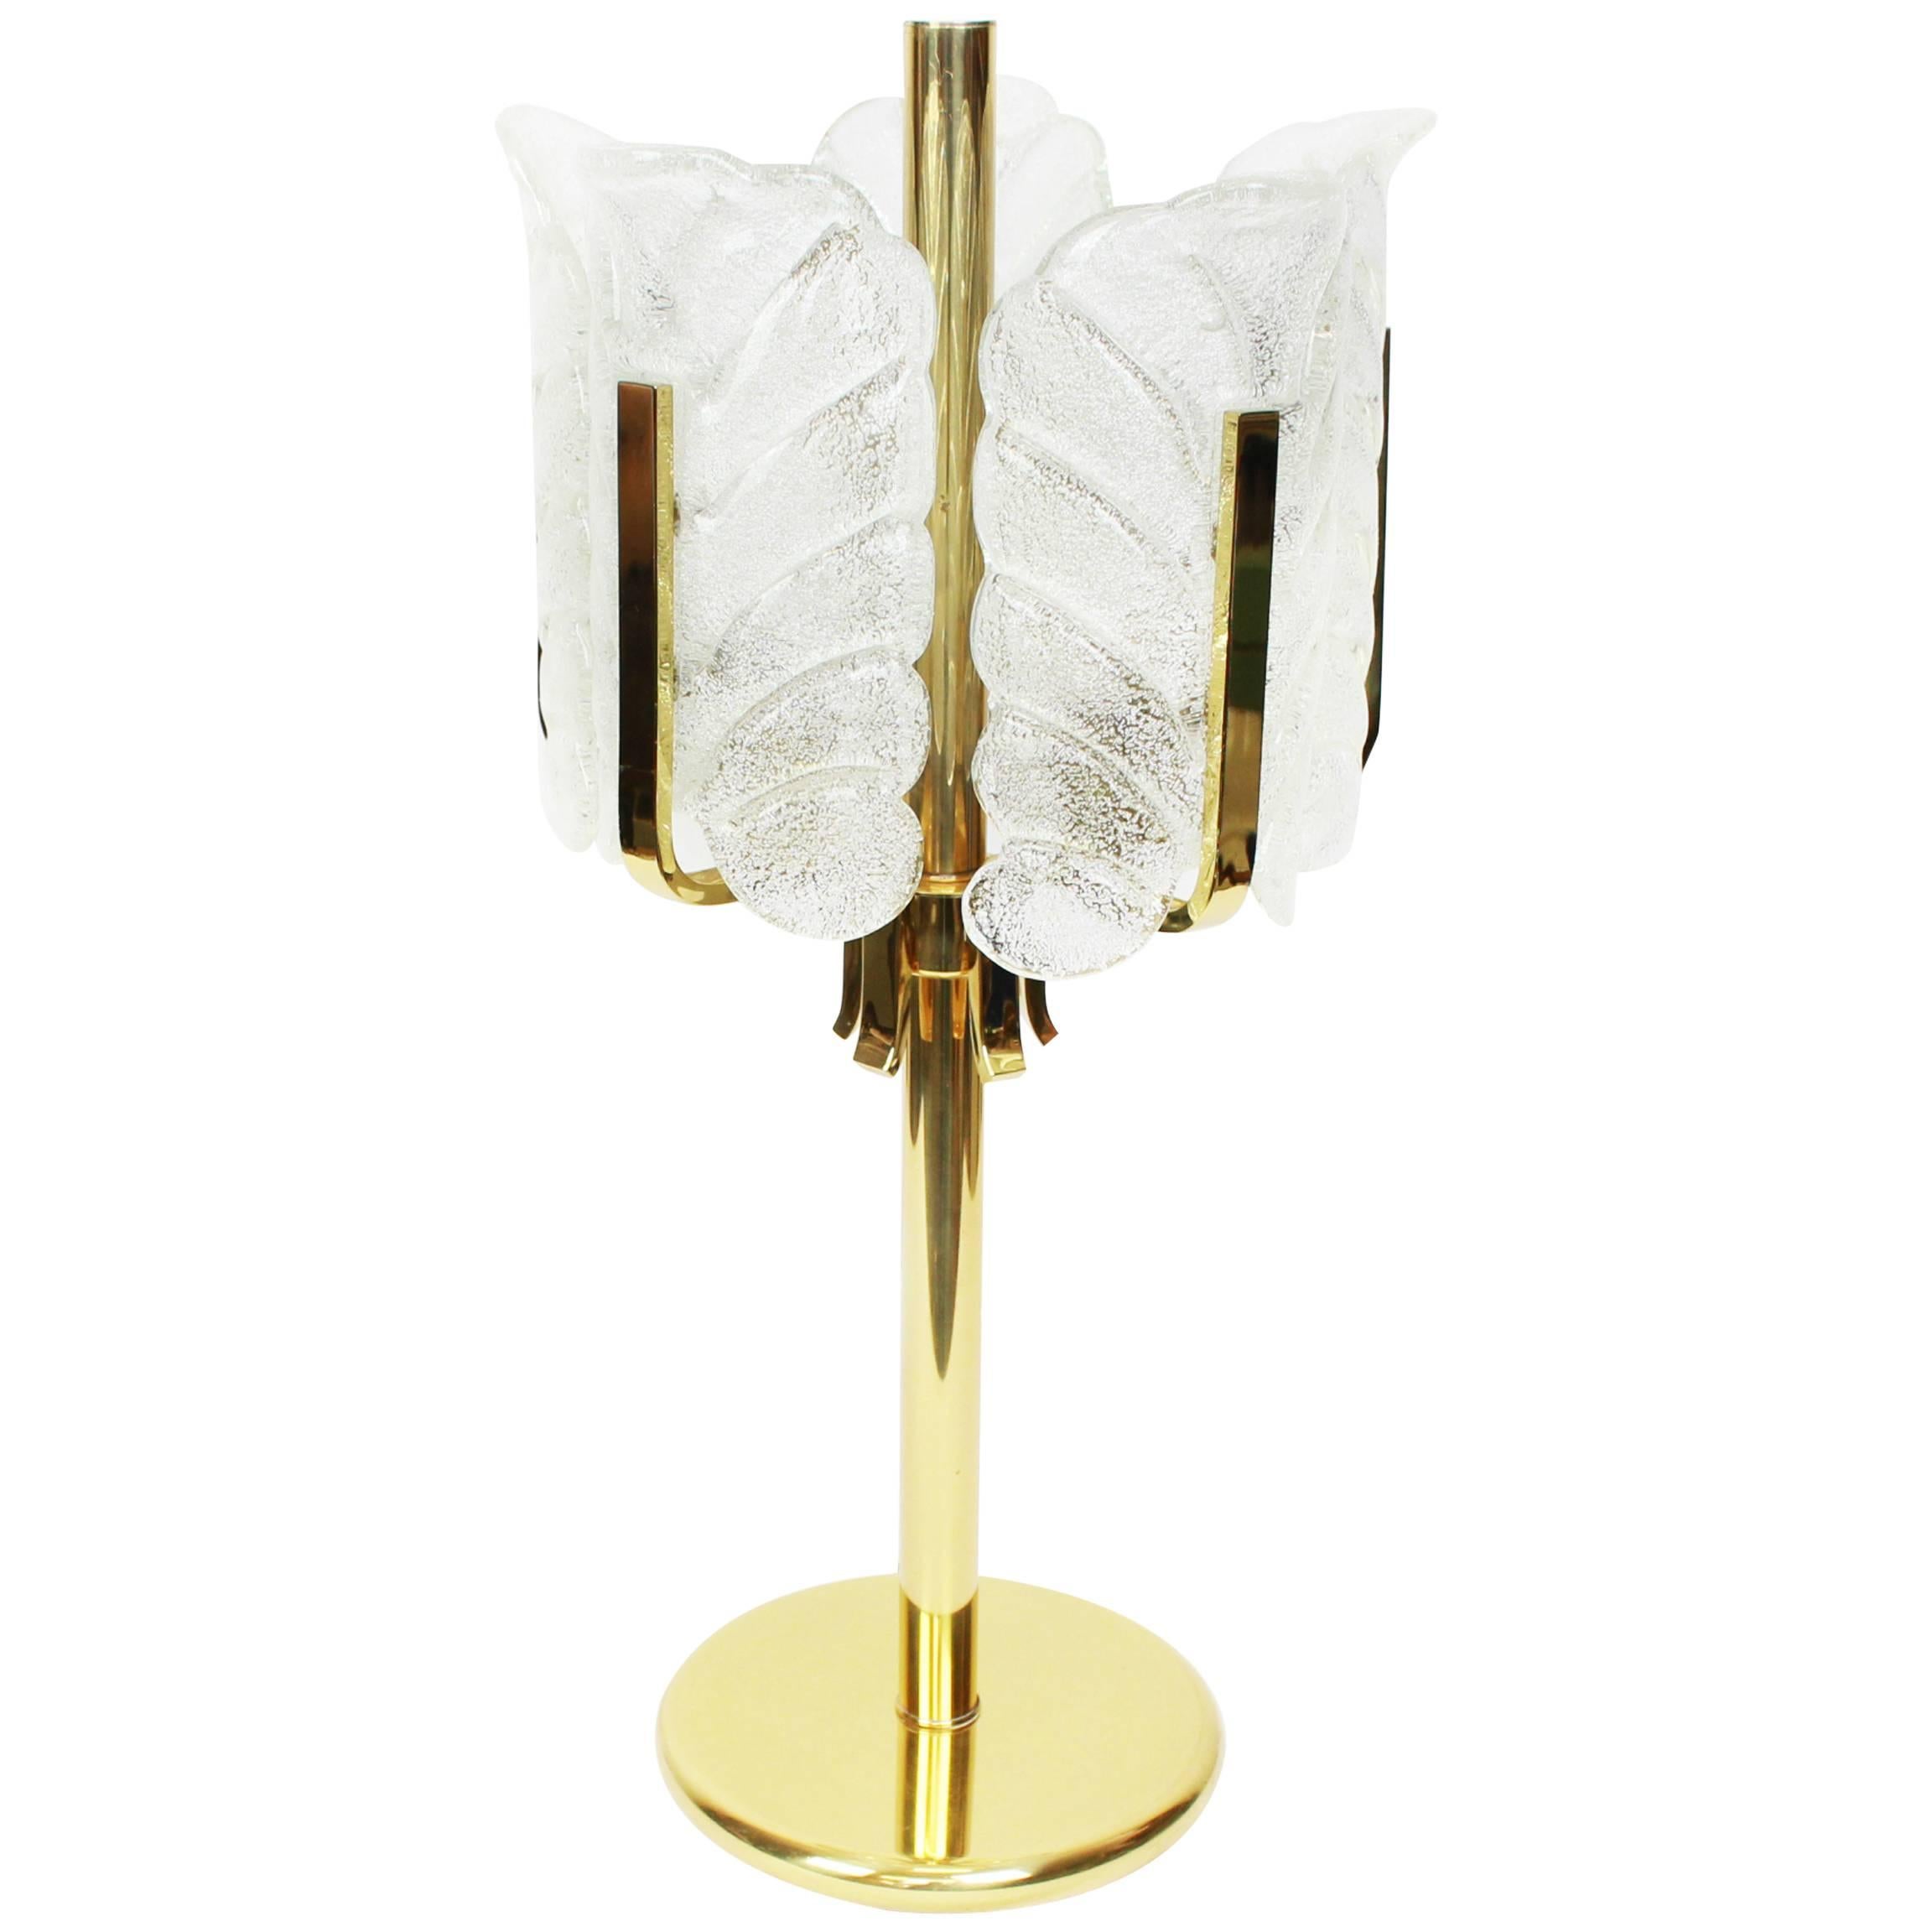 Brass 1 of 2 Rare Carl Fagerlund for Orrefors Table Lamp, Murano Glass Leaves, 1960s For Sale